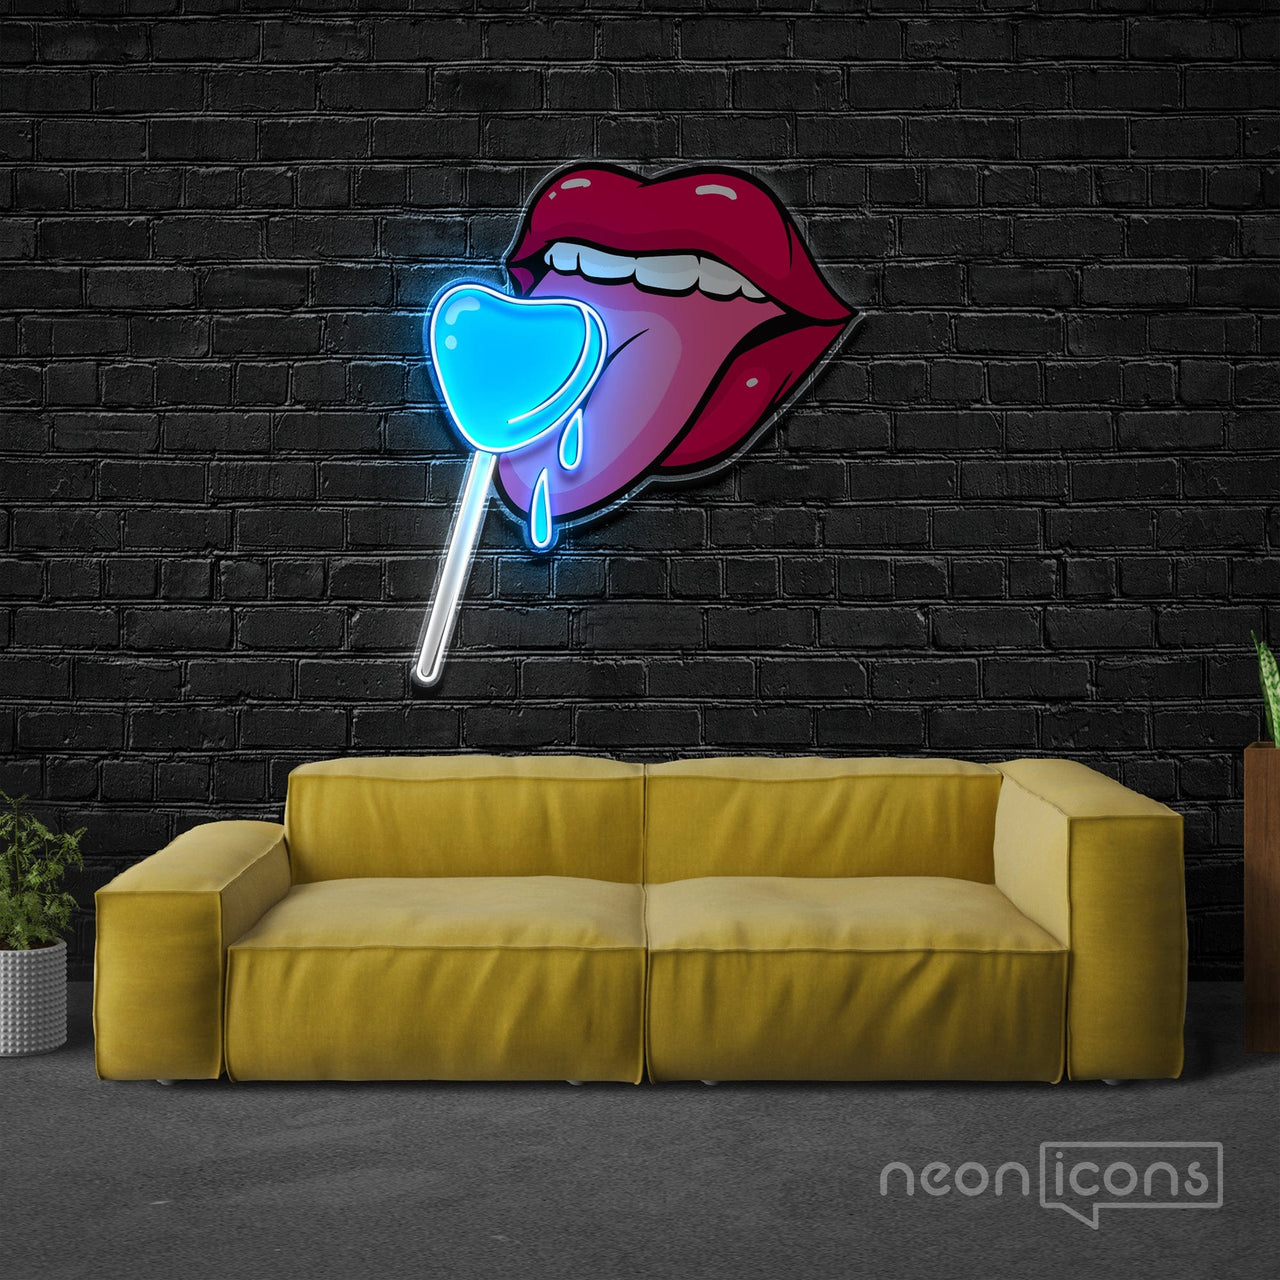 "Taste of Love" Neon x Acrylic Artwork by Neon Icons